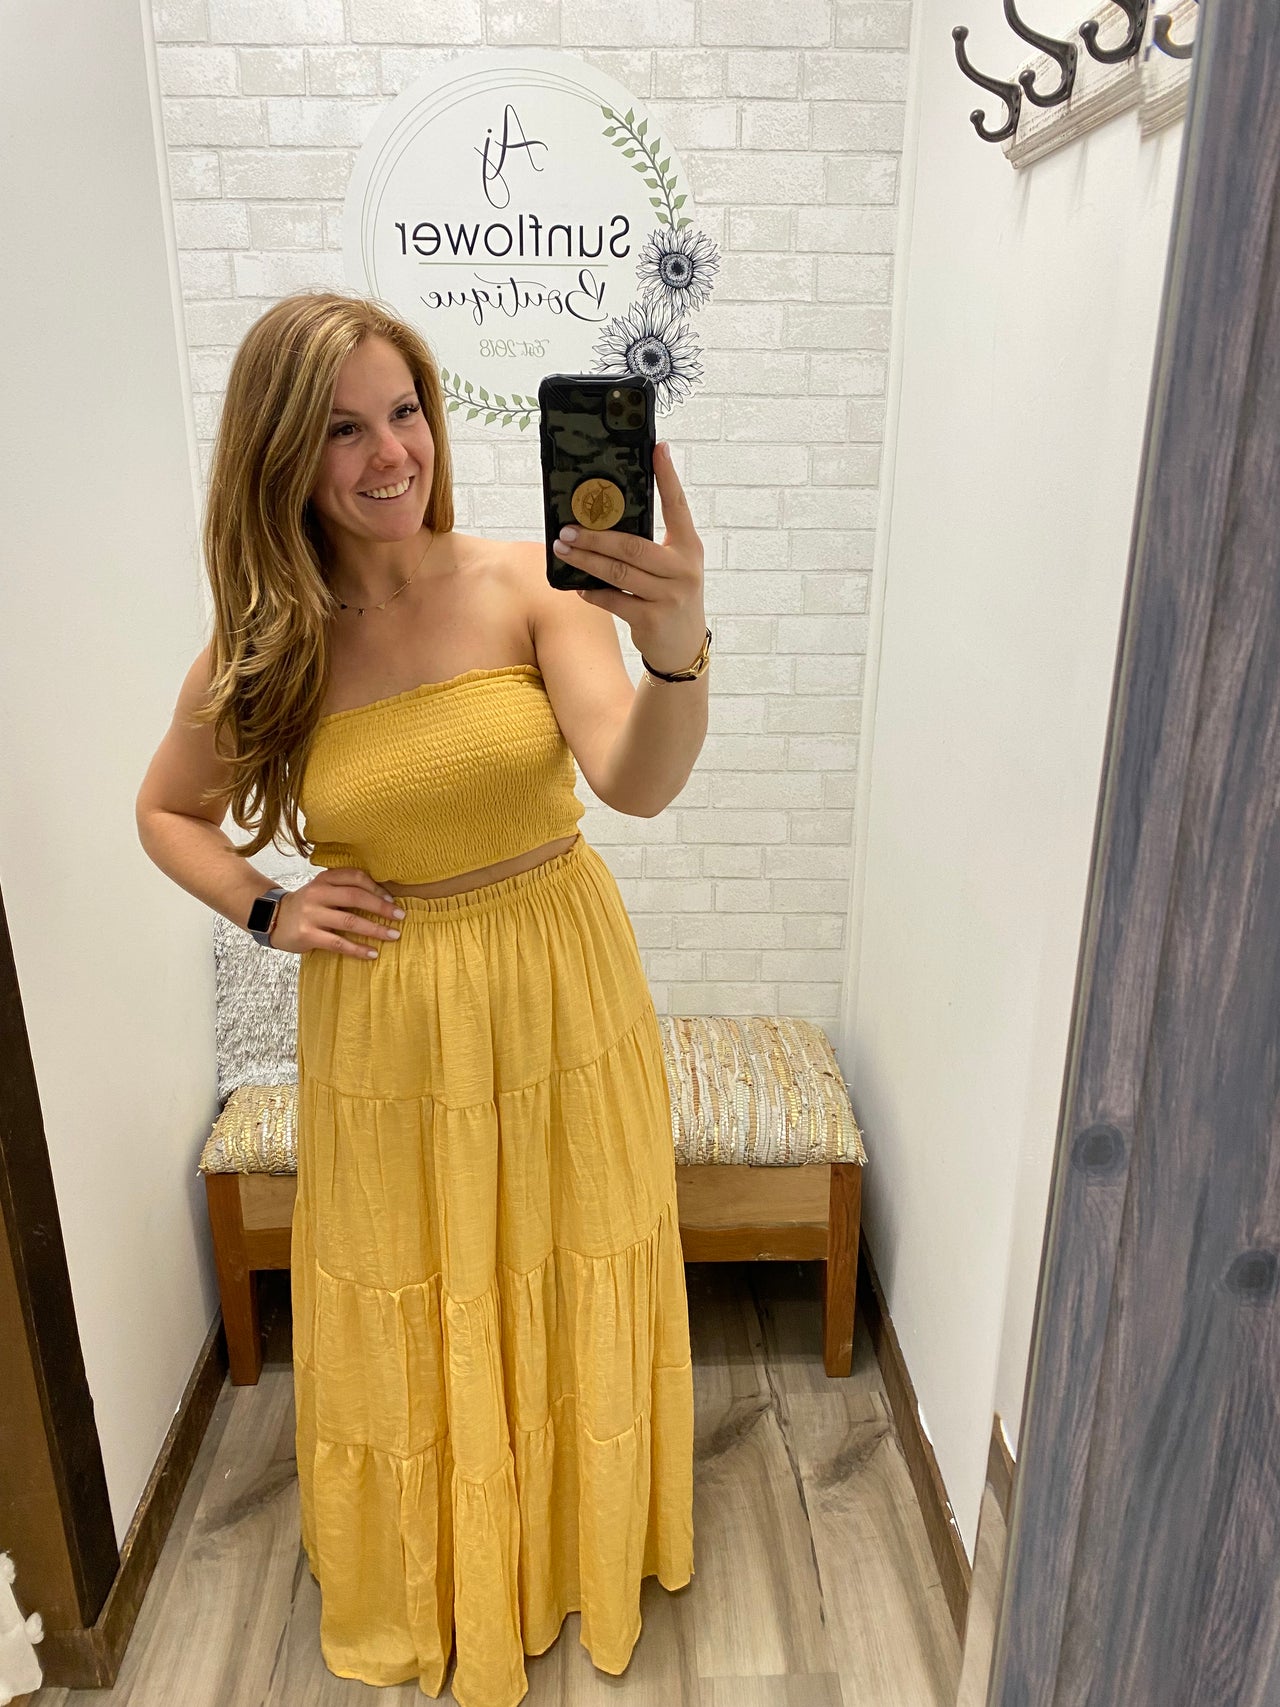 Wine Country Chic Tube Top and Skirt